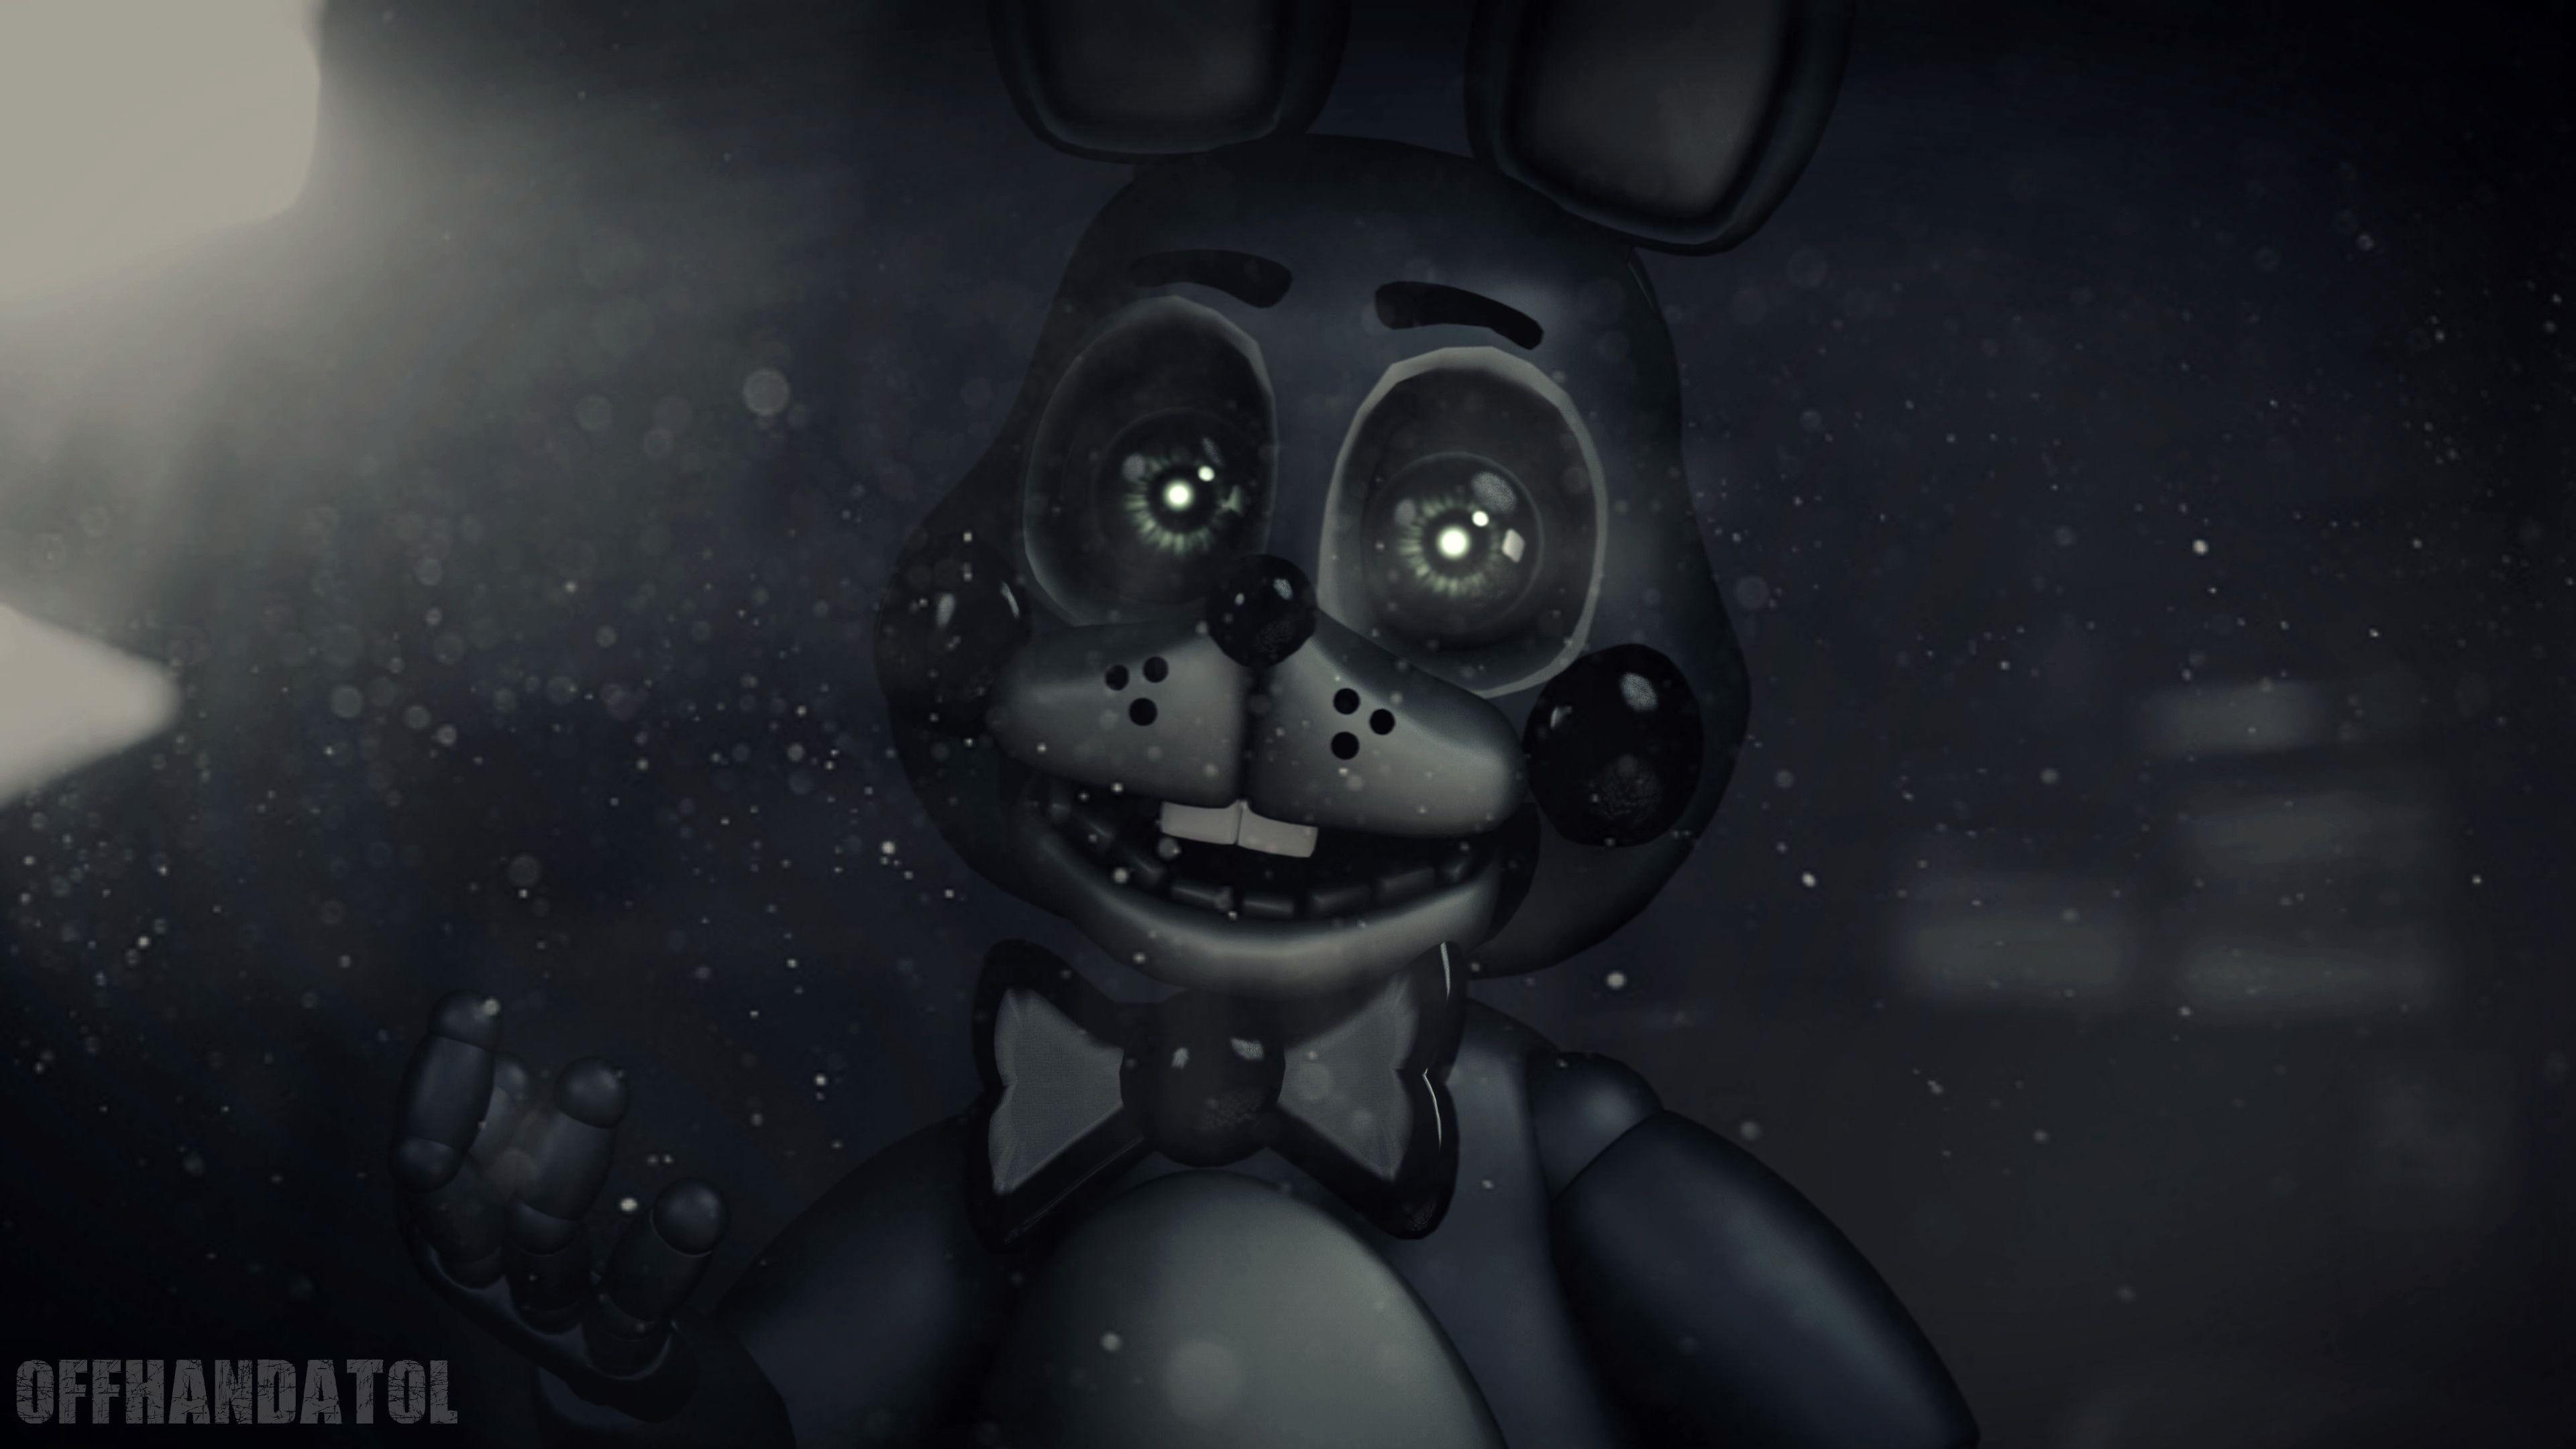 Anime Bonnie Wallpapers